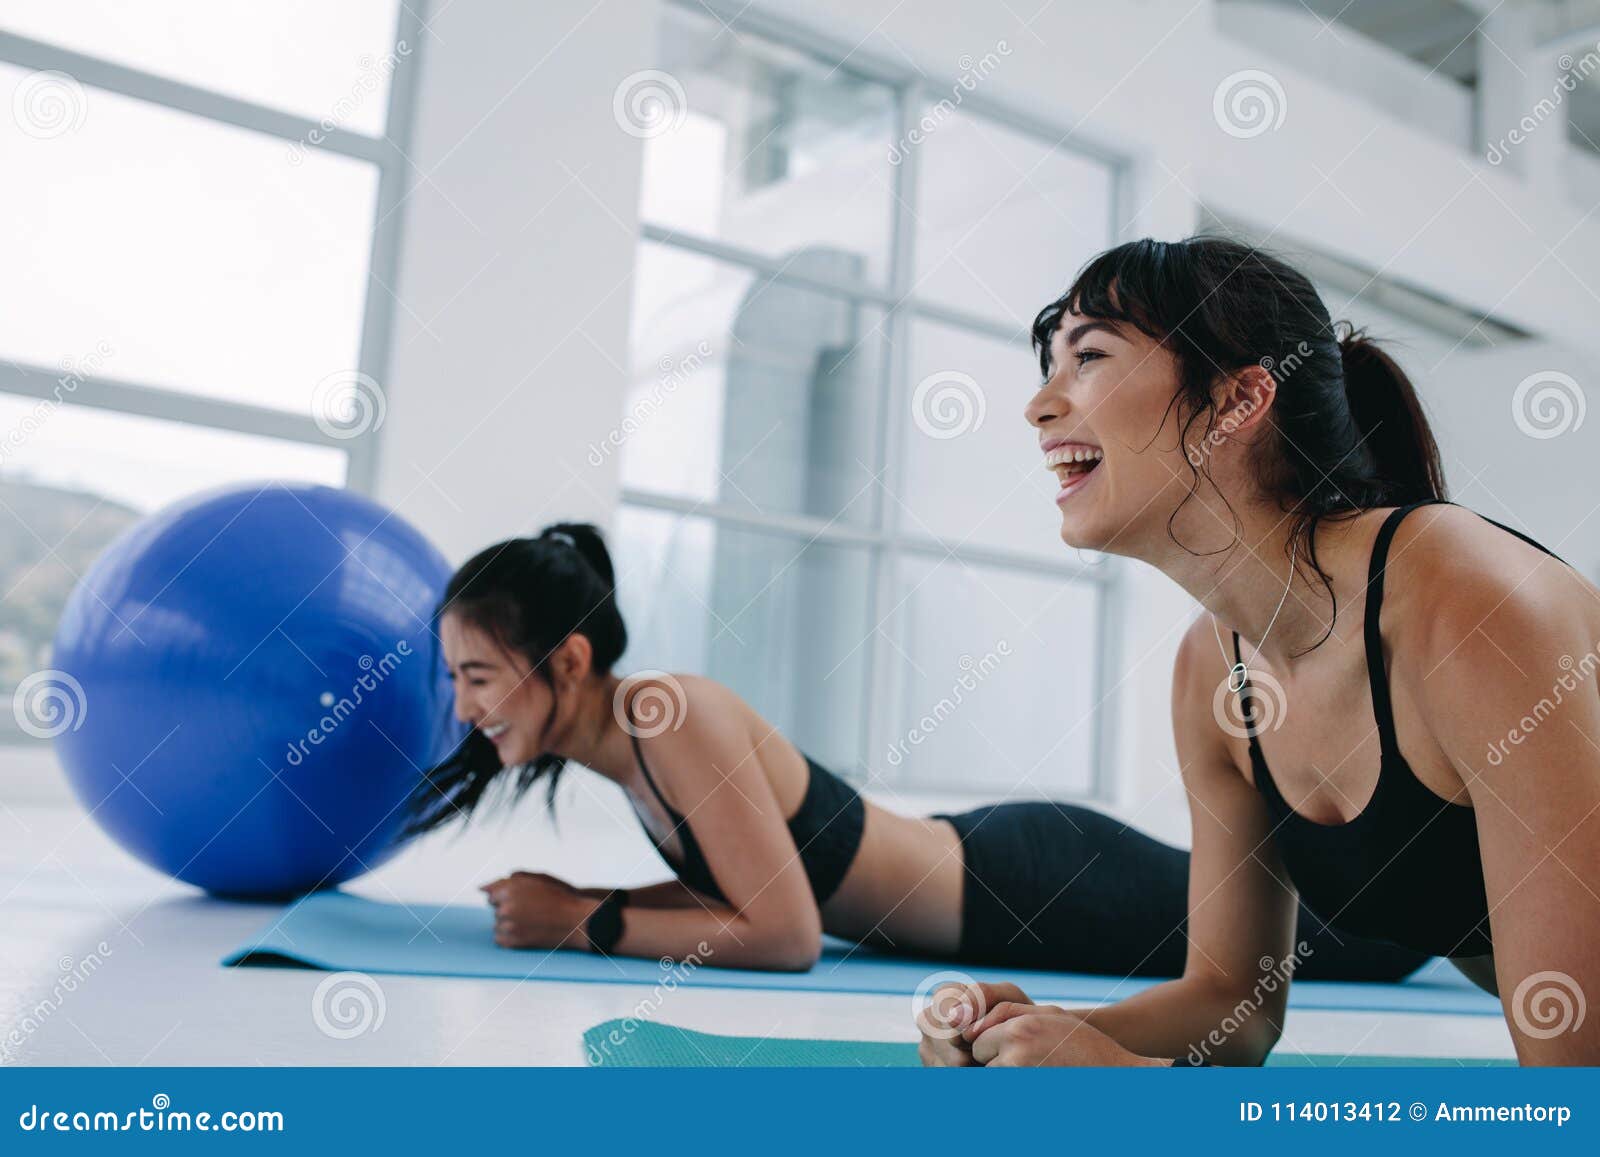 Fitness lesbians having fun in the gym